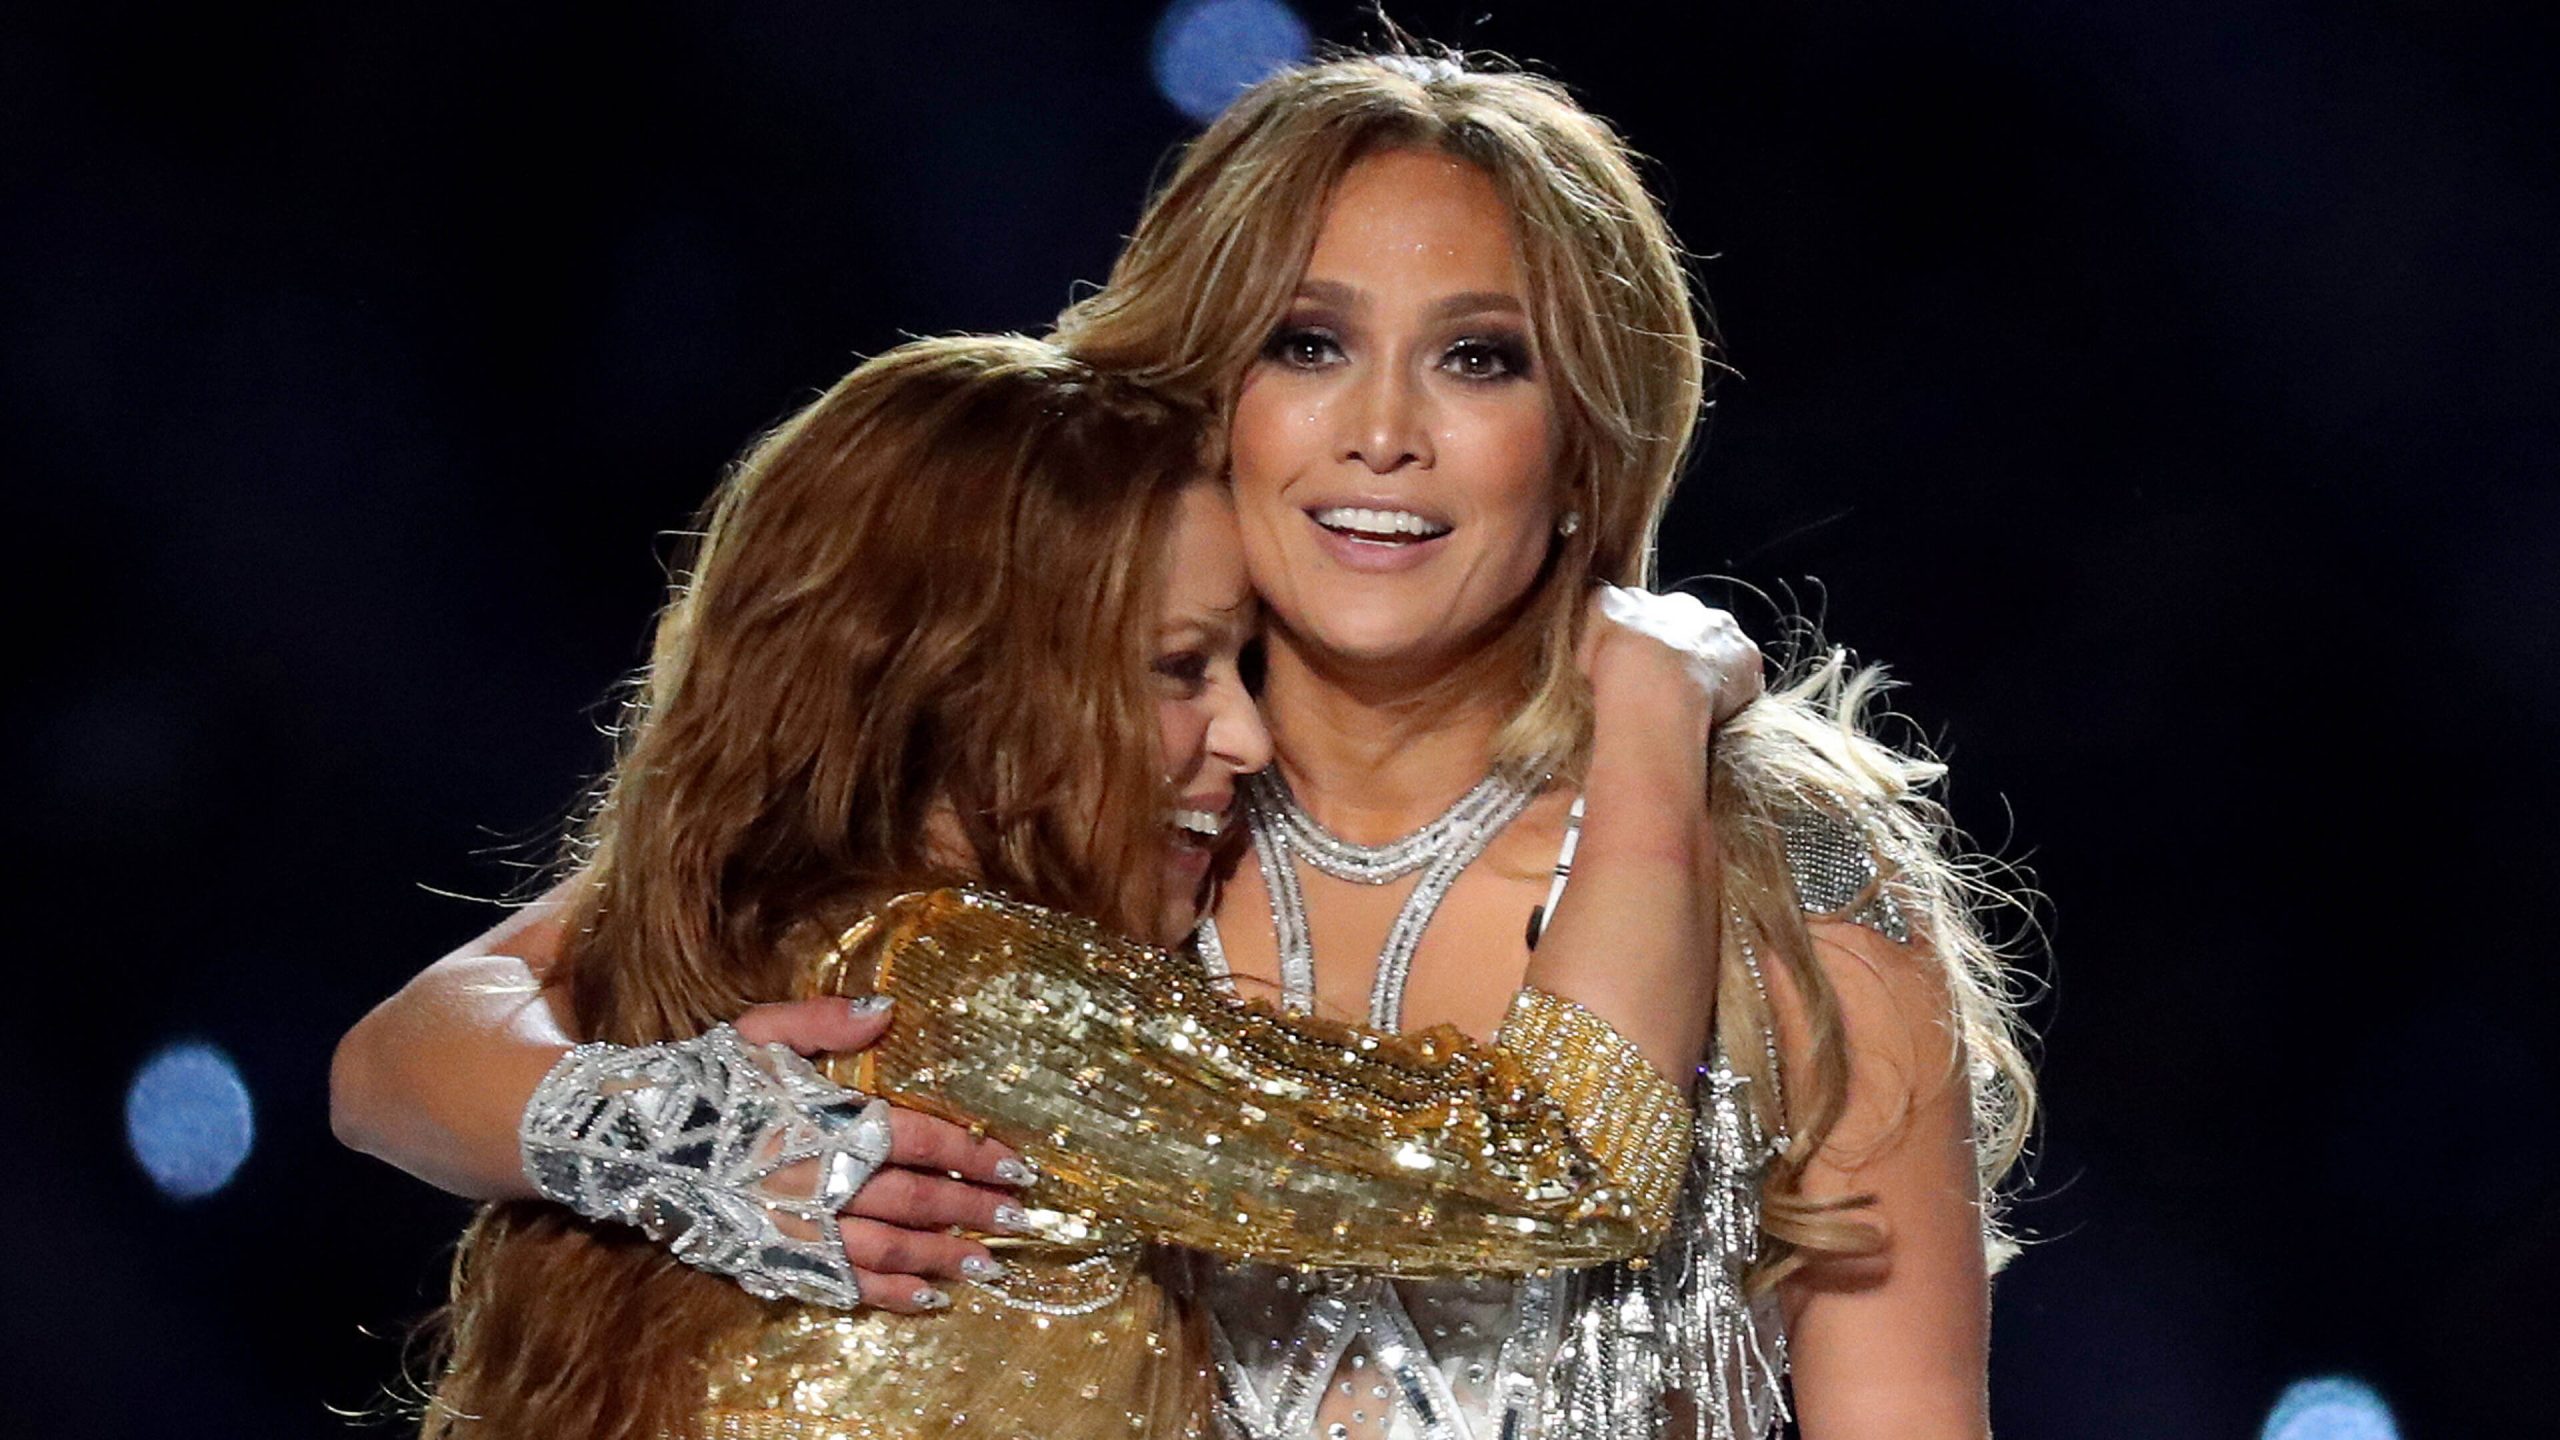 Jennifer Lopez receives backlash from viewers 